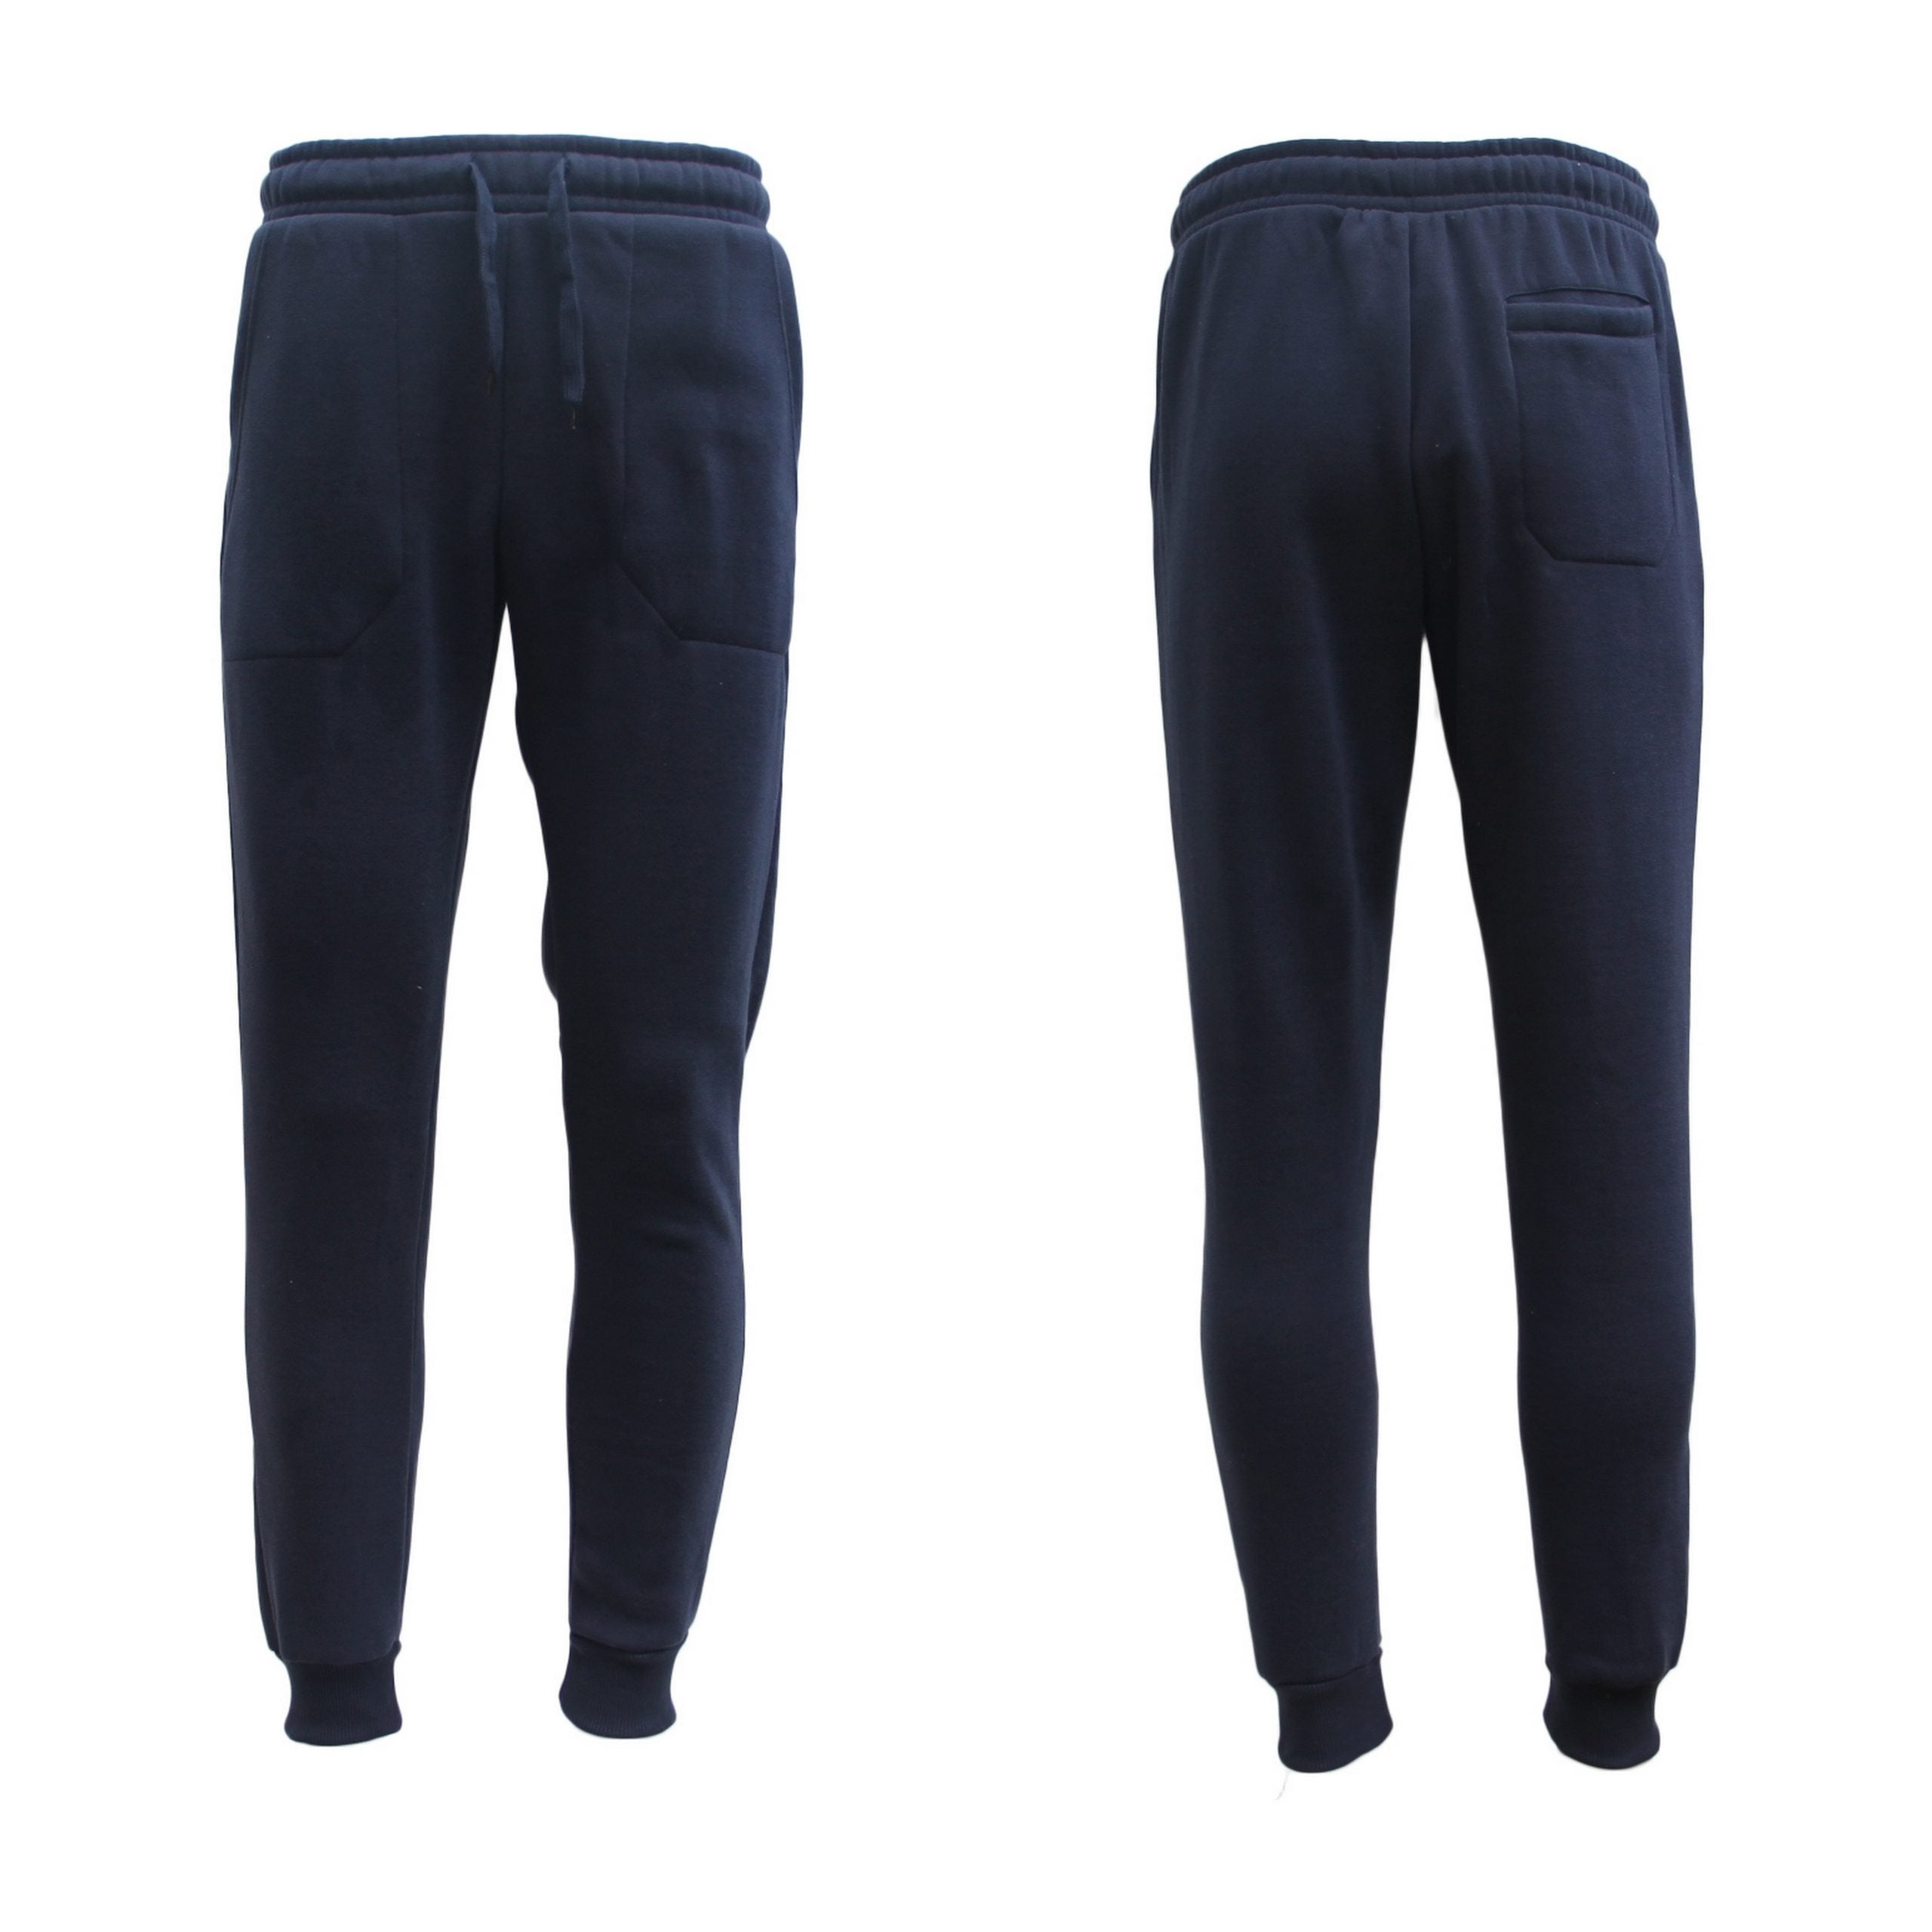 Mens Unisex Fleece Lined Sweat Track Pants Suit Casual Trackies Slim Cuff XS-6XL, Navy, XS